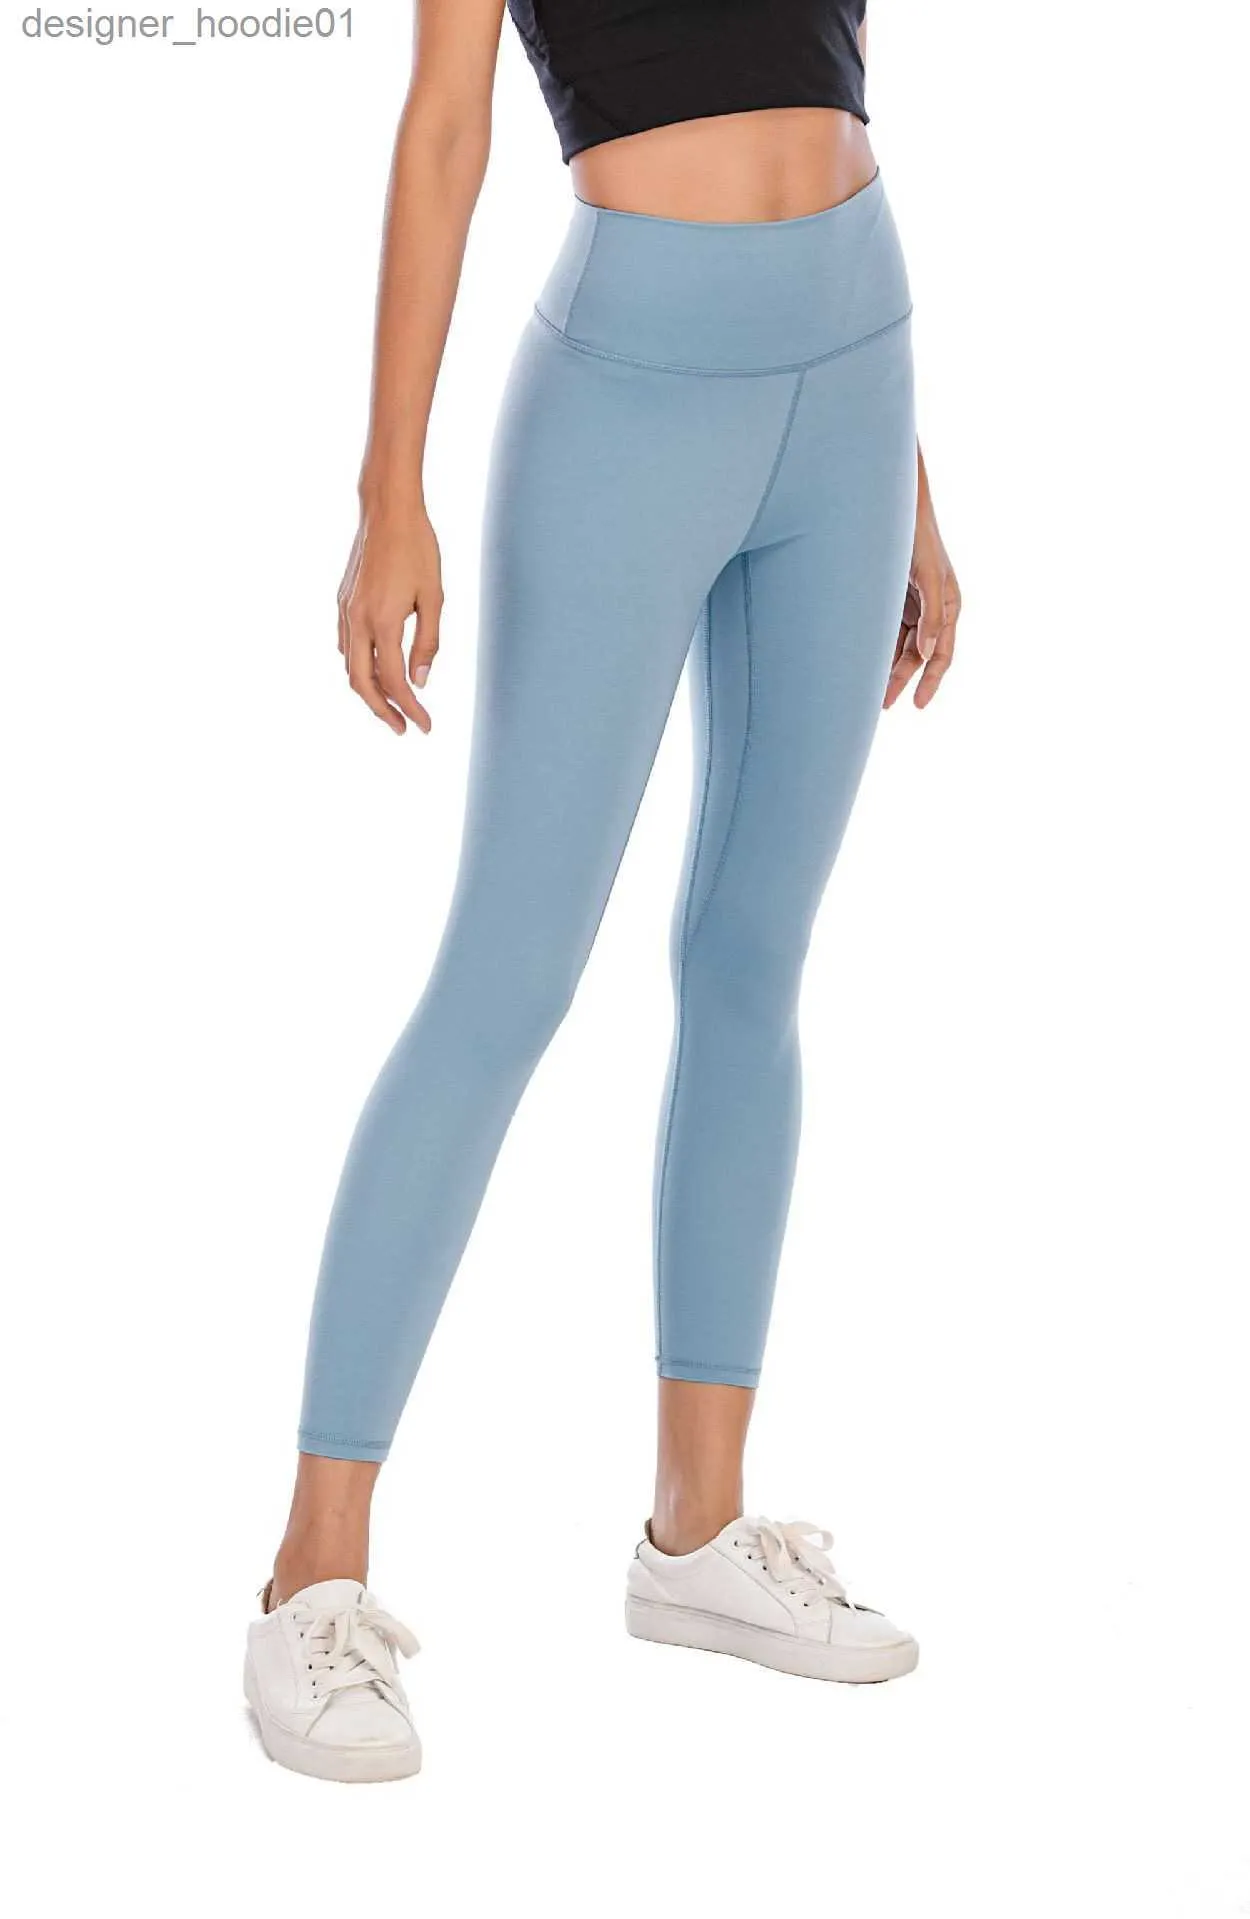  CANADA DIST And WHOLESALE - Women's Leggings / Women's Clothing:  Clothing, Shoes & Accessories